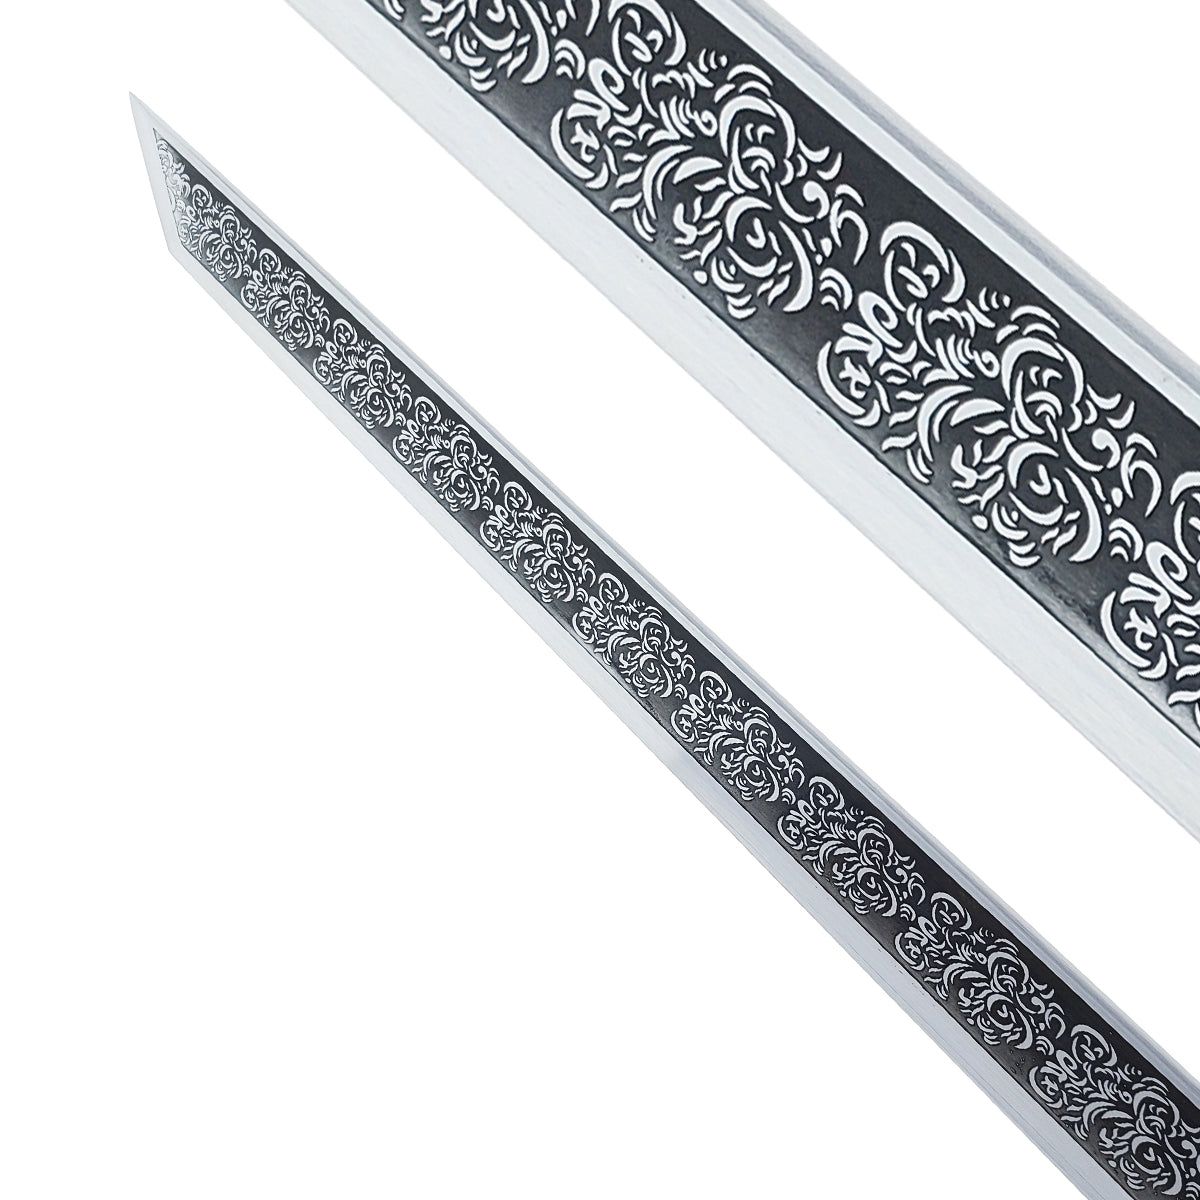 Hand made 1045 High Carbon Tang Dynasty Sword